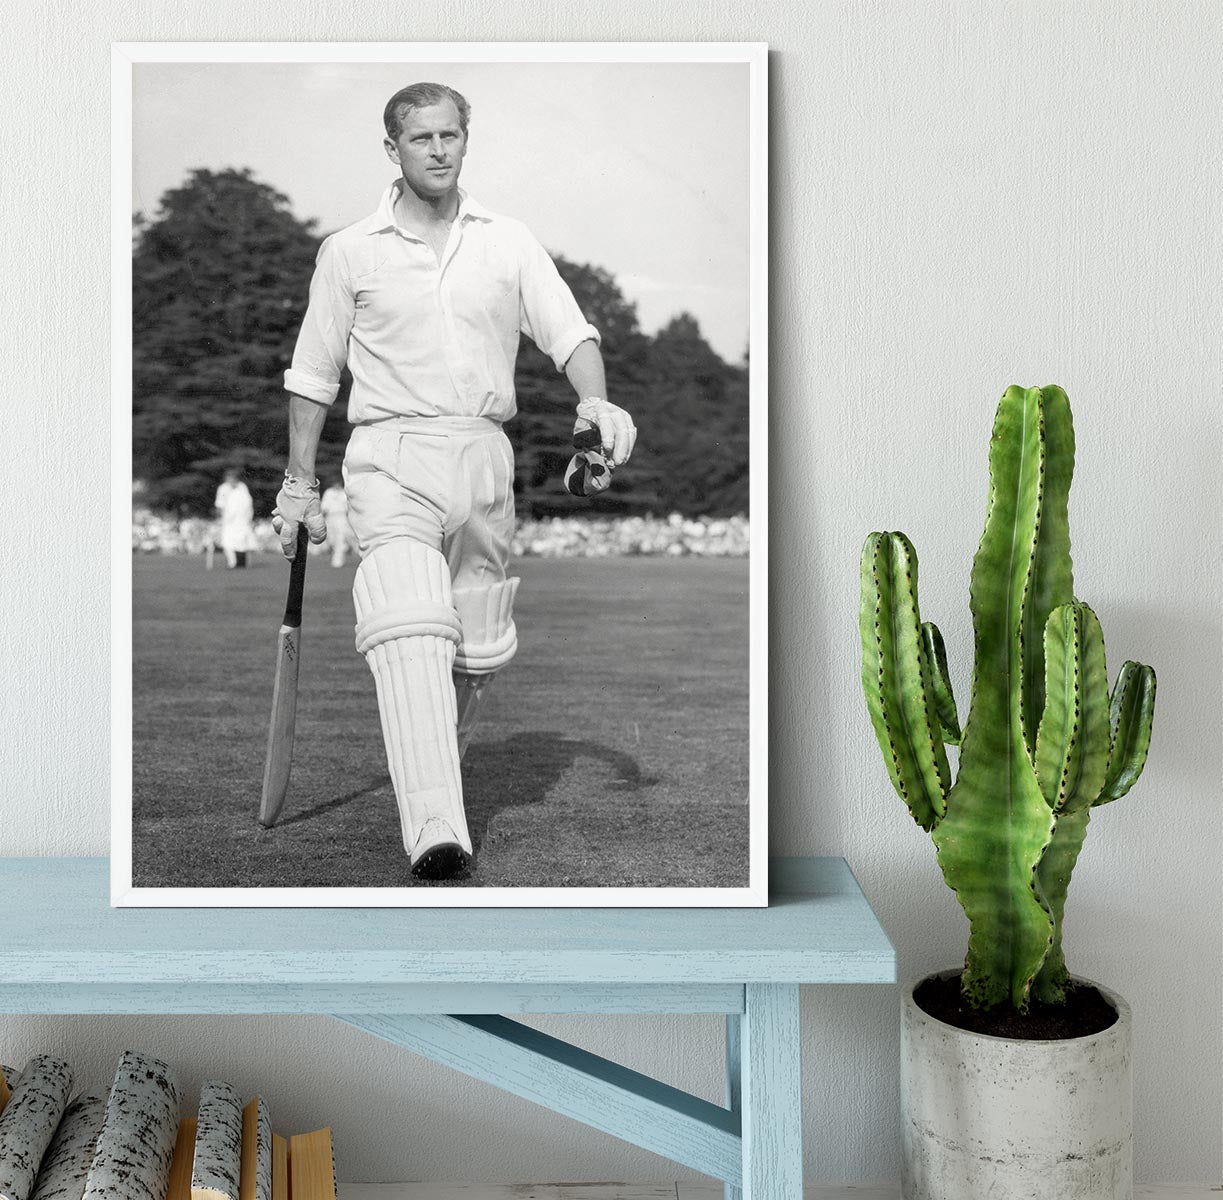 Prince Philip as cricket captain in a charity match Framed Print - Canvas Art Rocks -6